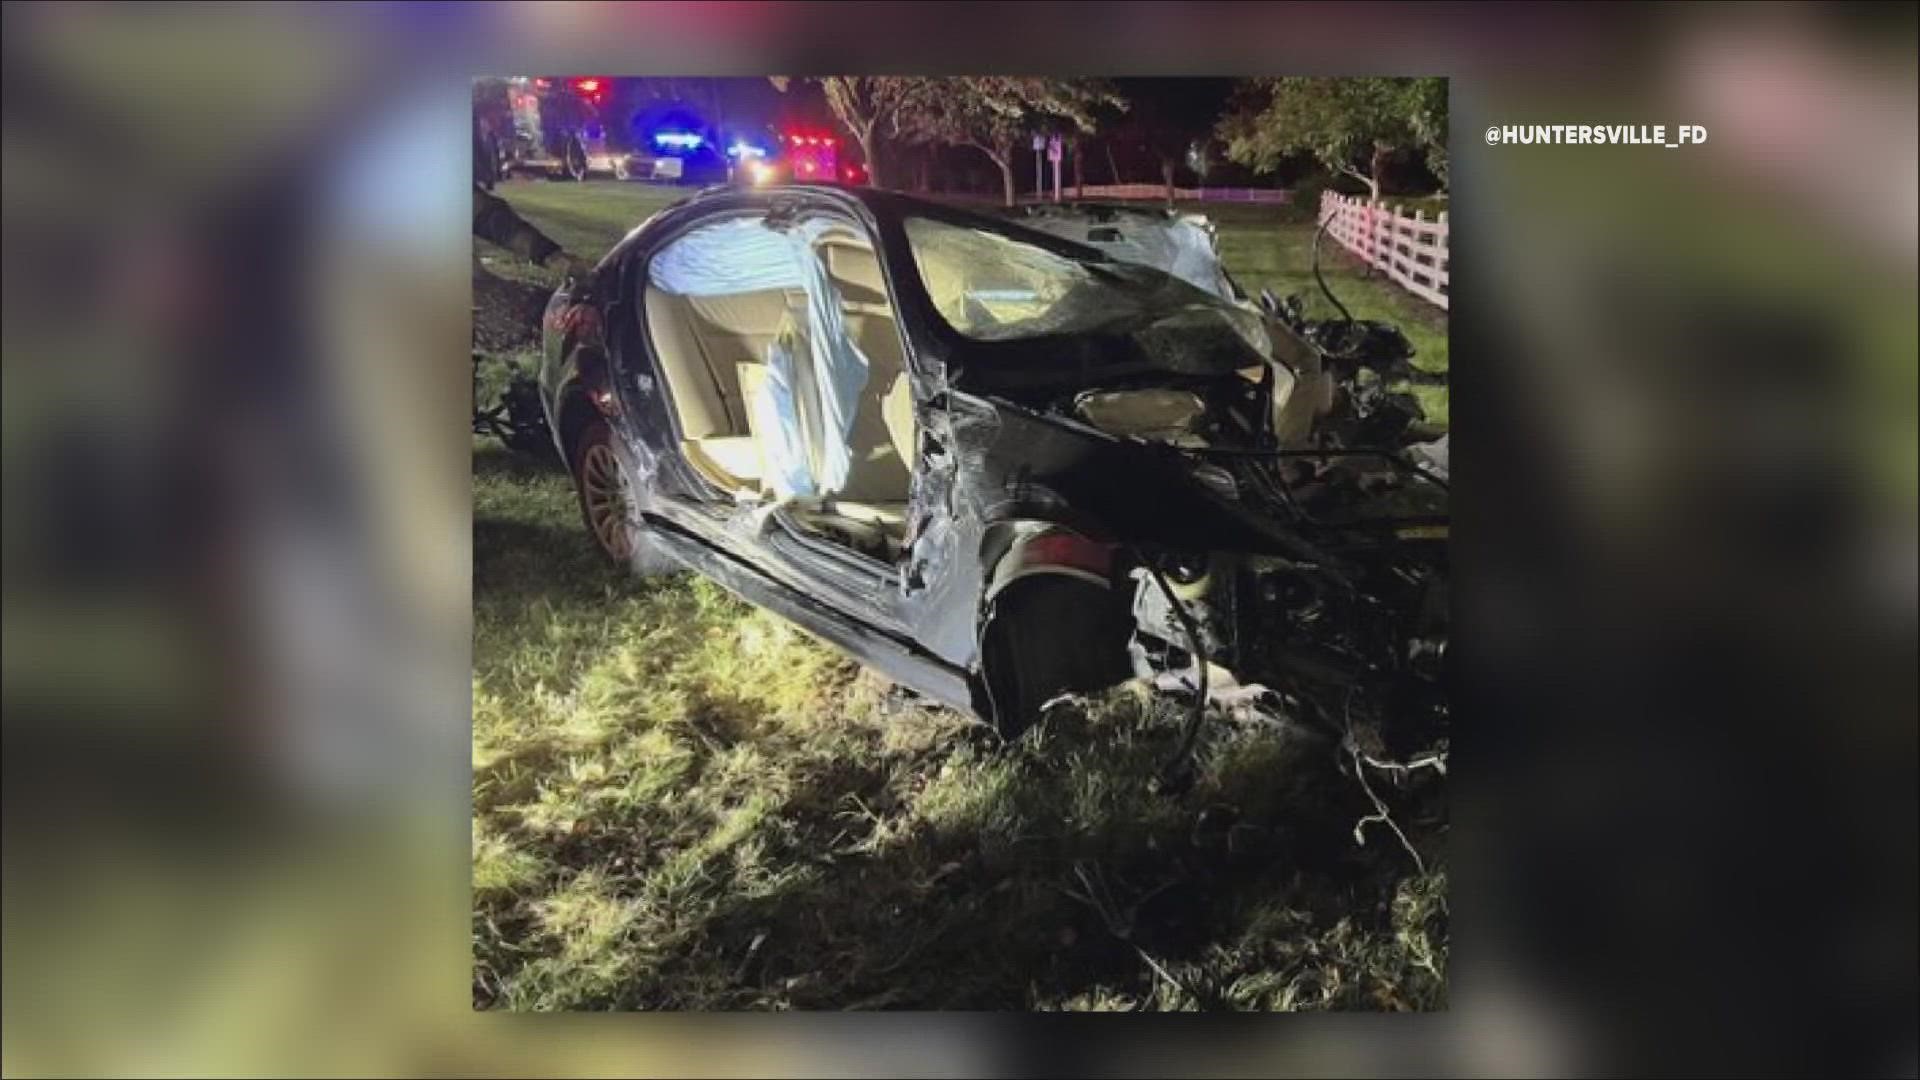 One person was killed and two others were hurt in a crash near Sam Furr Road on I-77 early Saturday morning, officials said.